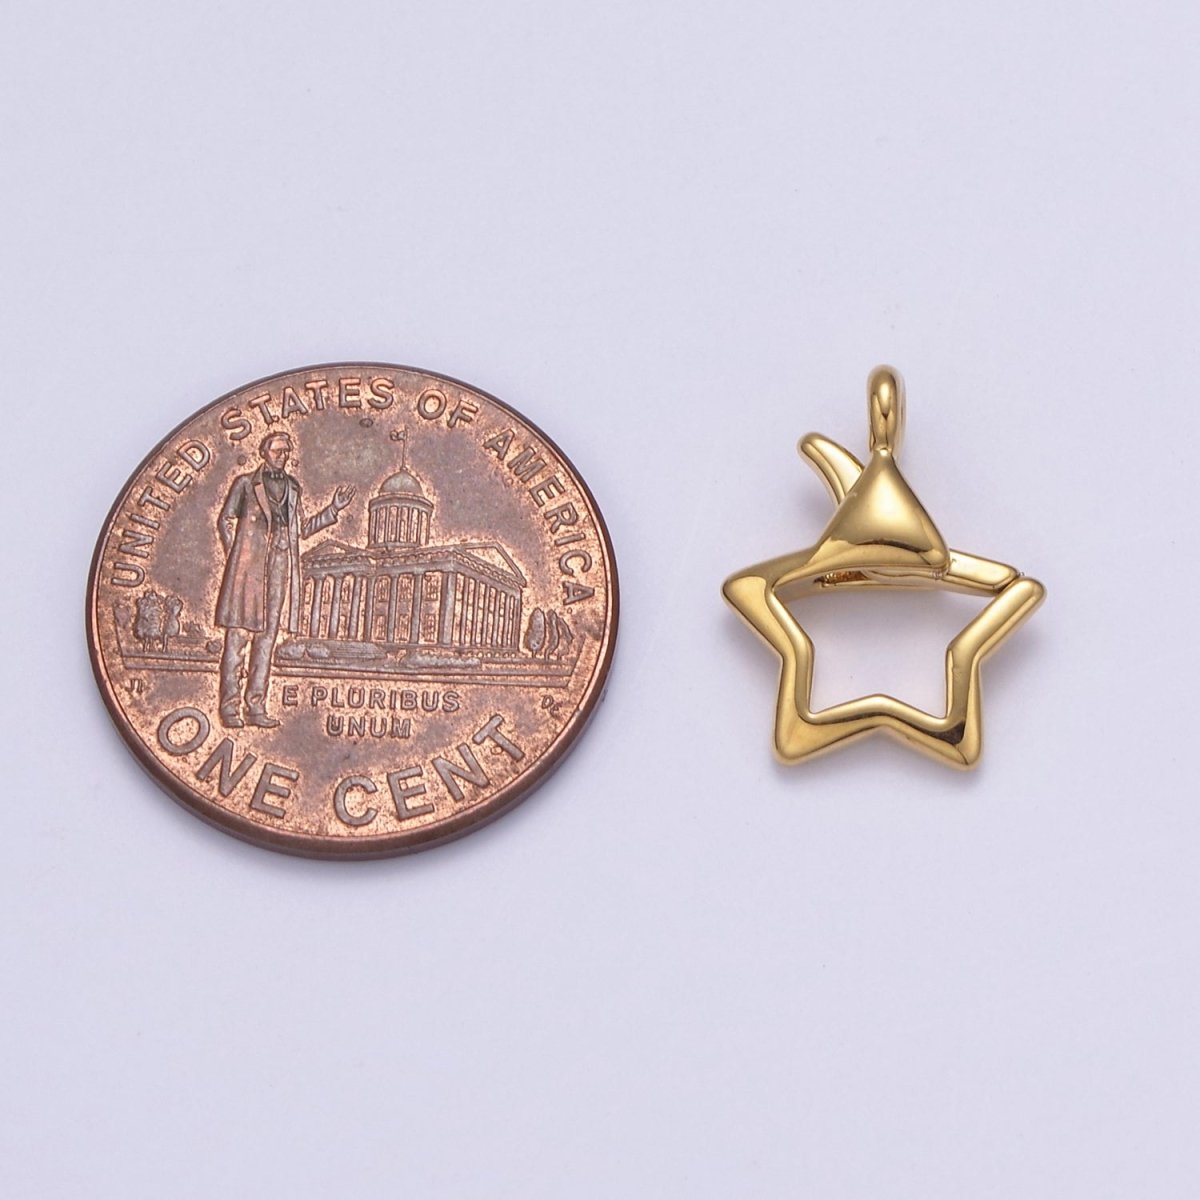 Gold or Silver Open Star Lobster Clasp, 15x11mm, Open Star Lobster Clasp, Star Charm Enhancer Clasp Wholesale Supply L-659 L-658 - DLUXCA